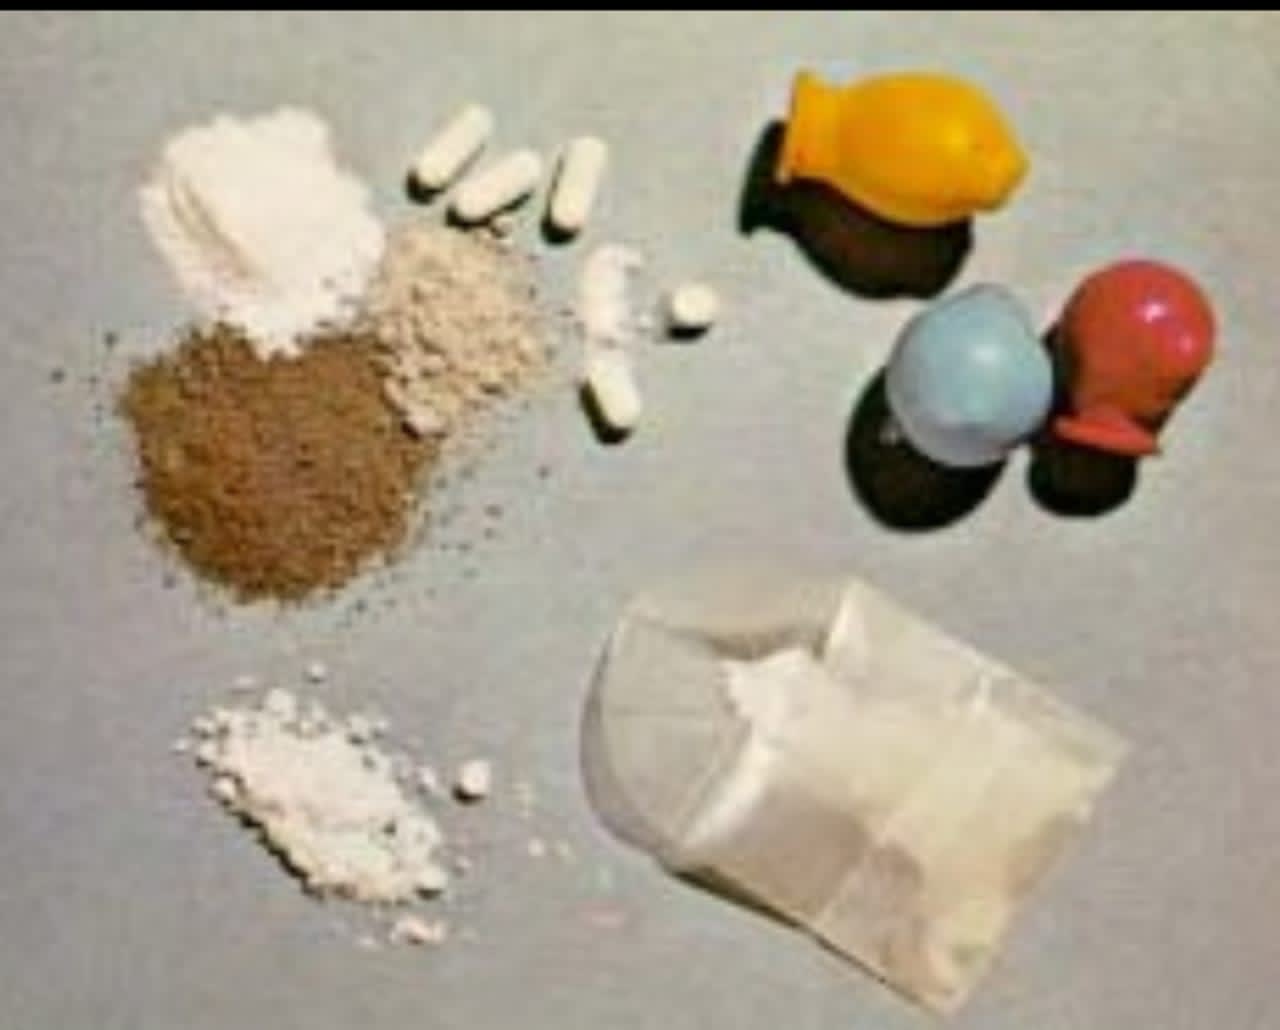 In this photo illustration, you can see what heroin looks like in powder and pill form.